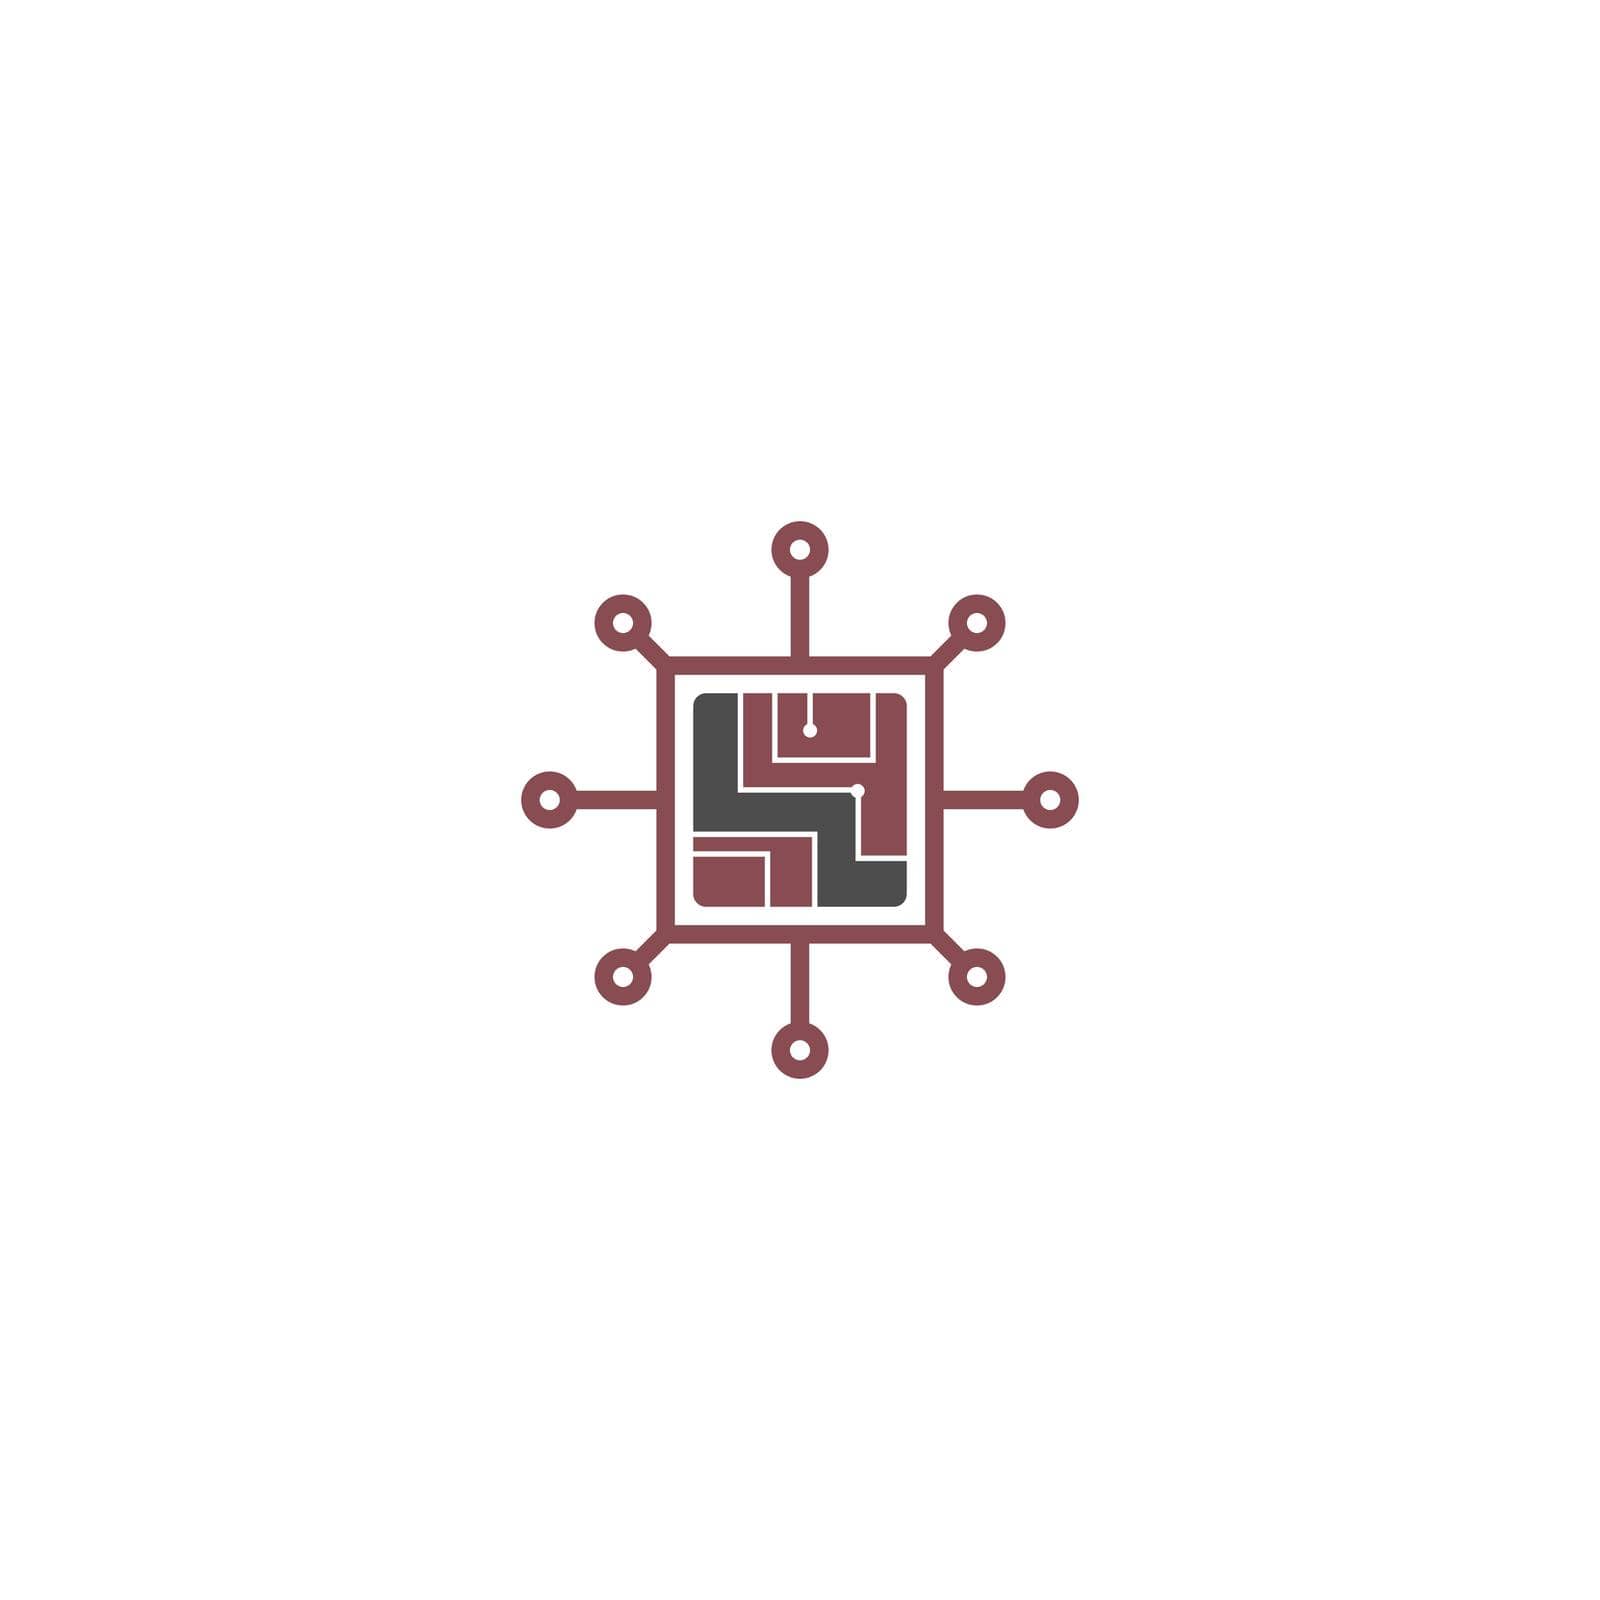 Circuit technology logo icon design vector by bellaxbudhong3